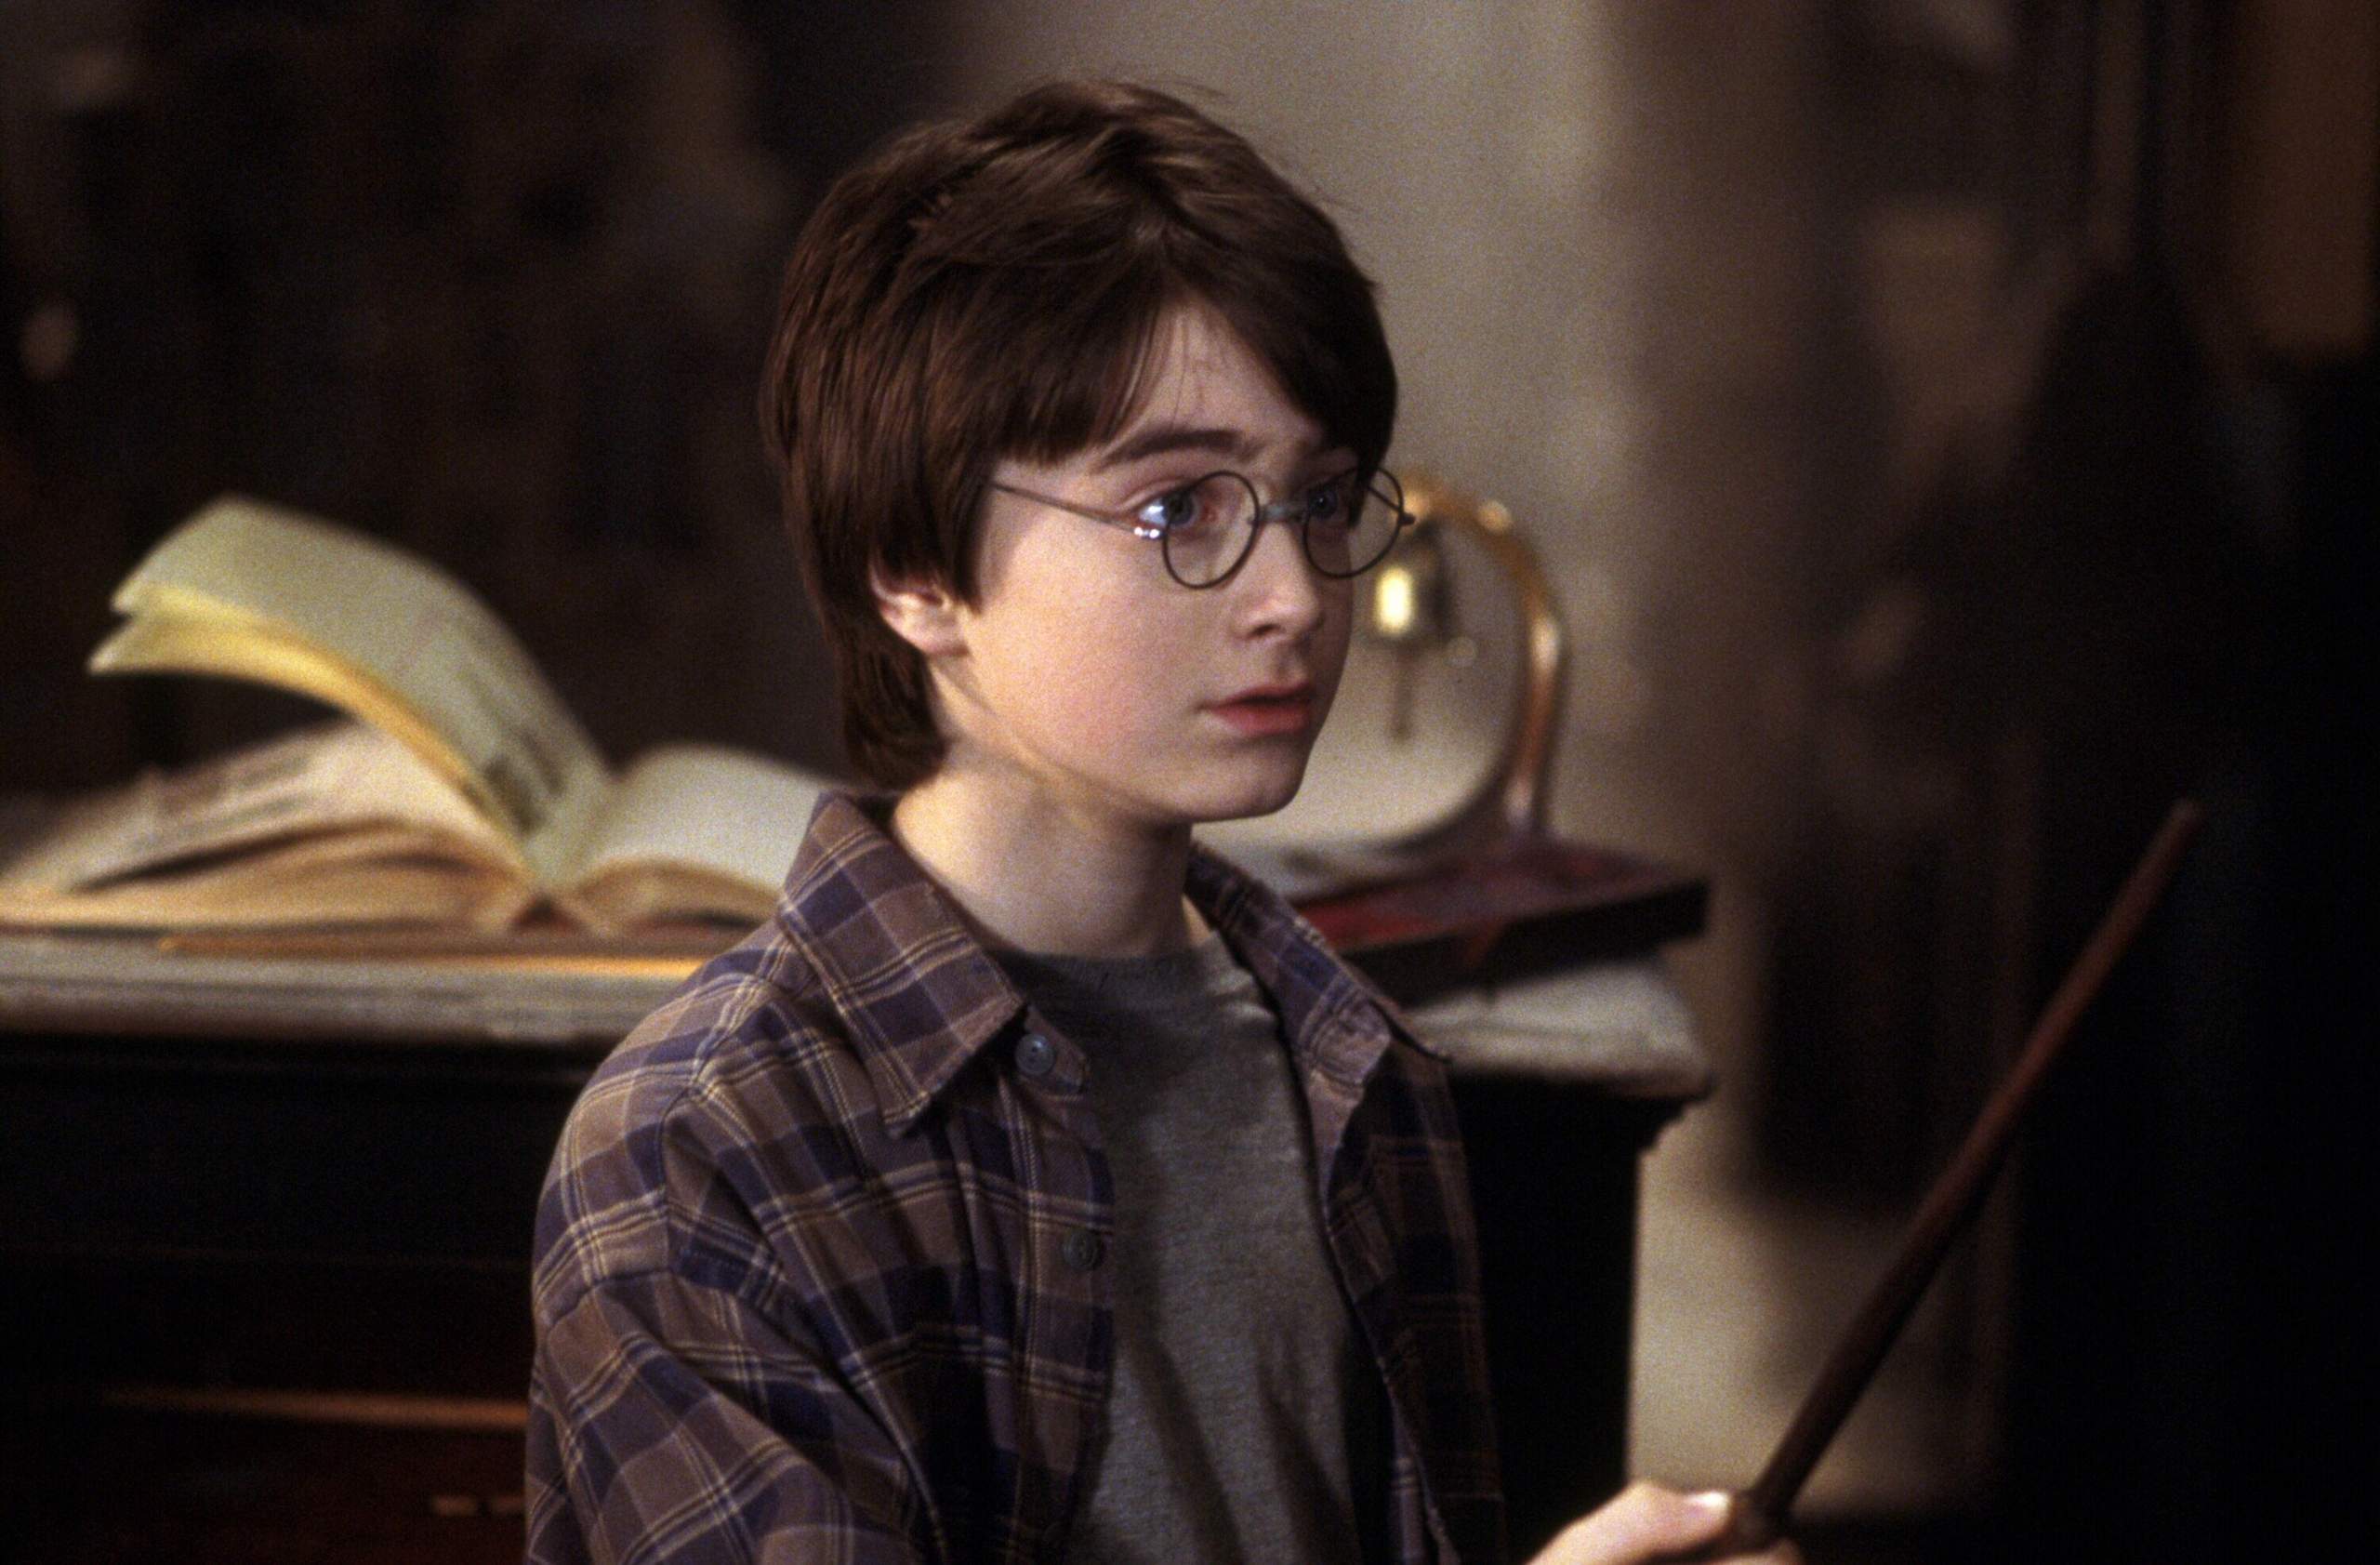 Daniel Radcliffe was a bit of a wild child on set during the filming of the movies. This was particularly the case when he was a younger child. Through the course of filming eight films, Radcliffe went through 160 pairs of glasses. In the process, he reportedly broke nearly 80 different wands. <br> <br> In the novels, Harry is portrayed as having buck teeth and green eyes. However, on-screen, neither ended up occurring. Green contacts were initially used on Radcliffe. However, he endured an eye allergy -- and thus production scrapped the plans for the authentic eye color. As such, you're seeing him on-screen with his natural eyes.